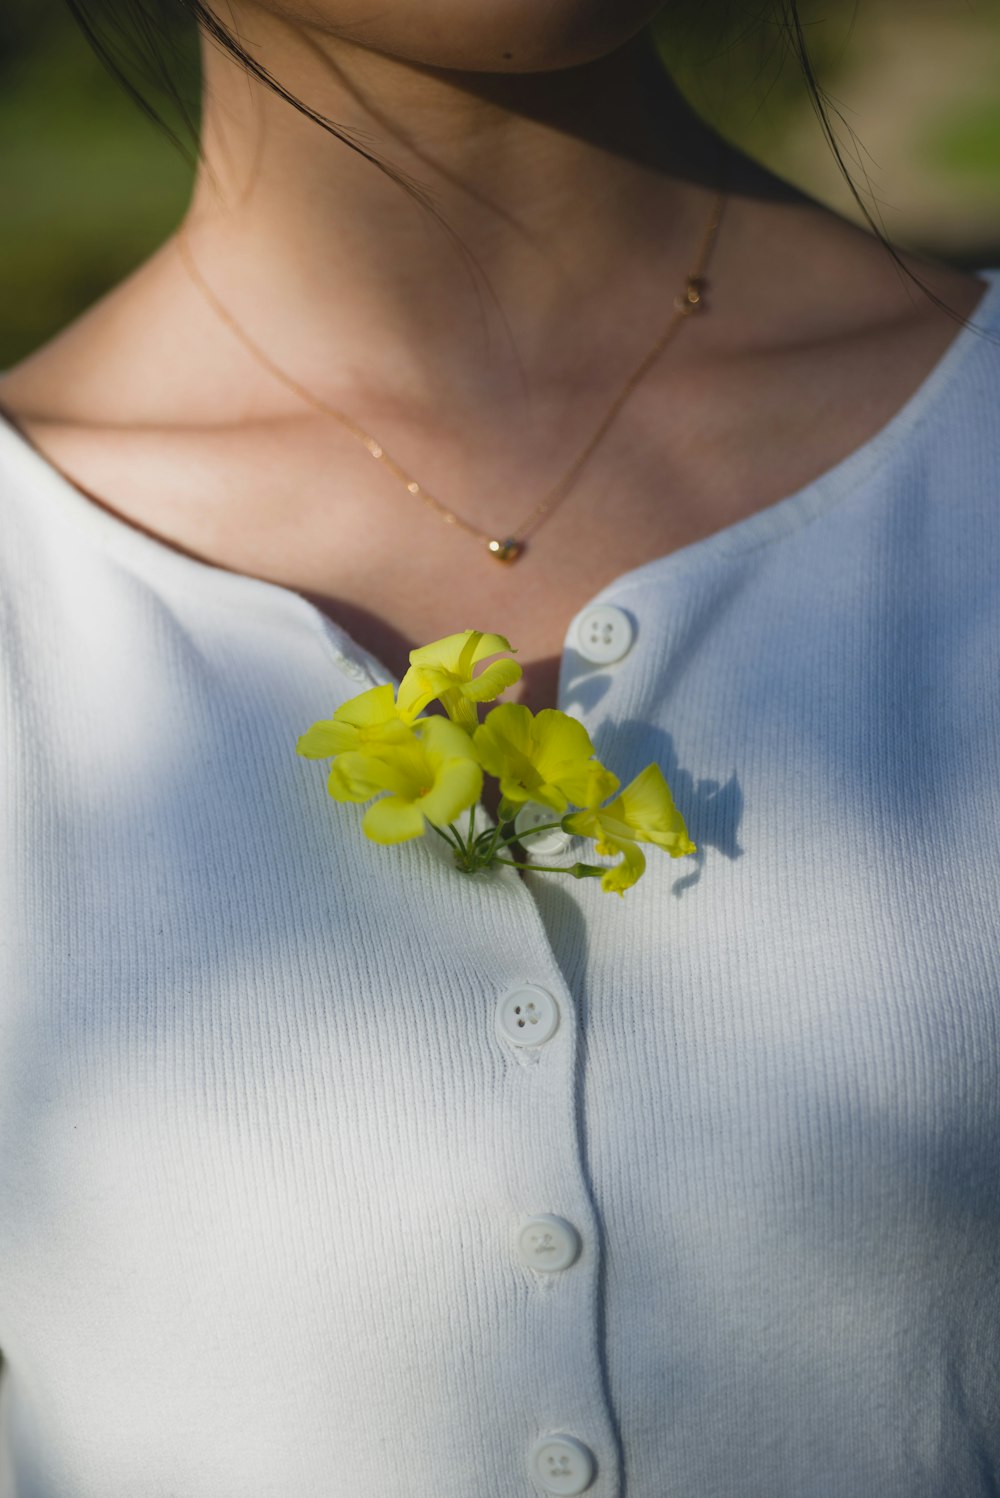 woman in white button up shirt with yellow flower on her neck